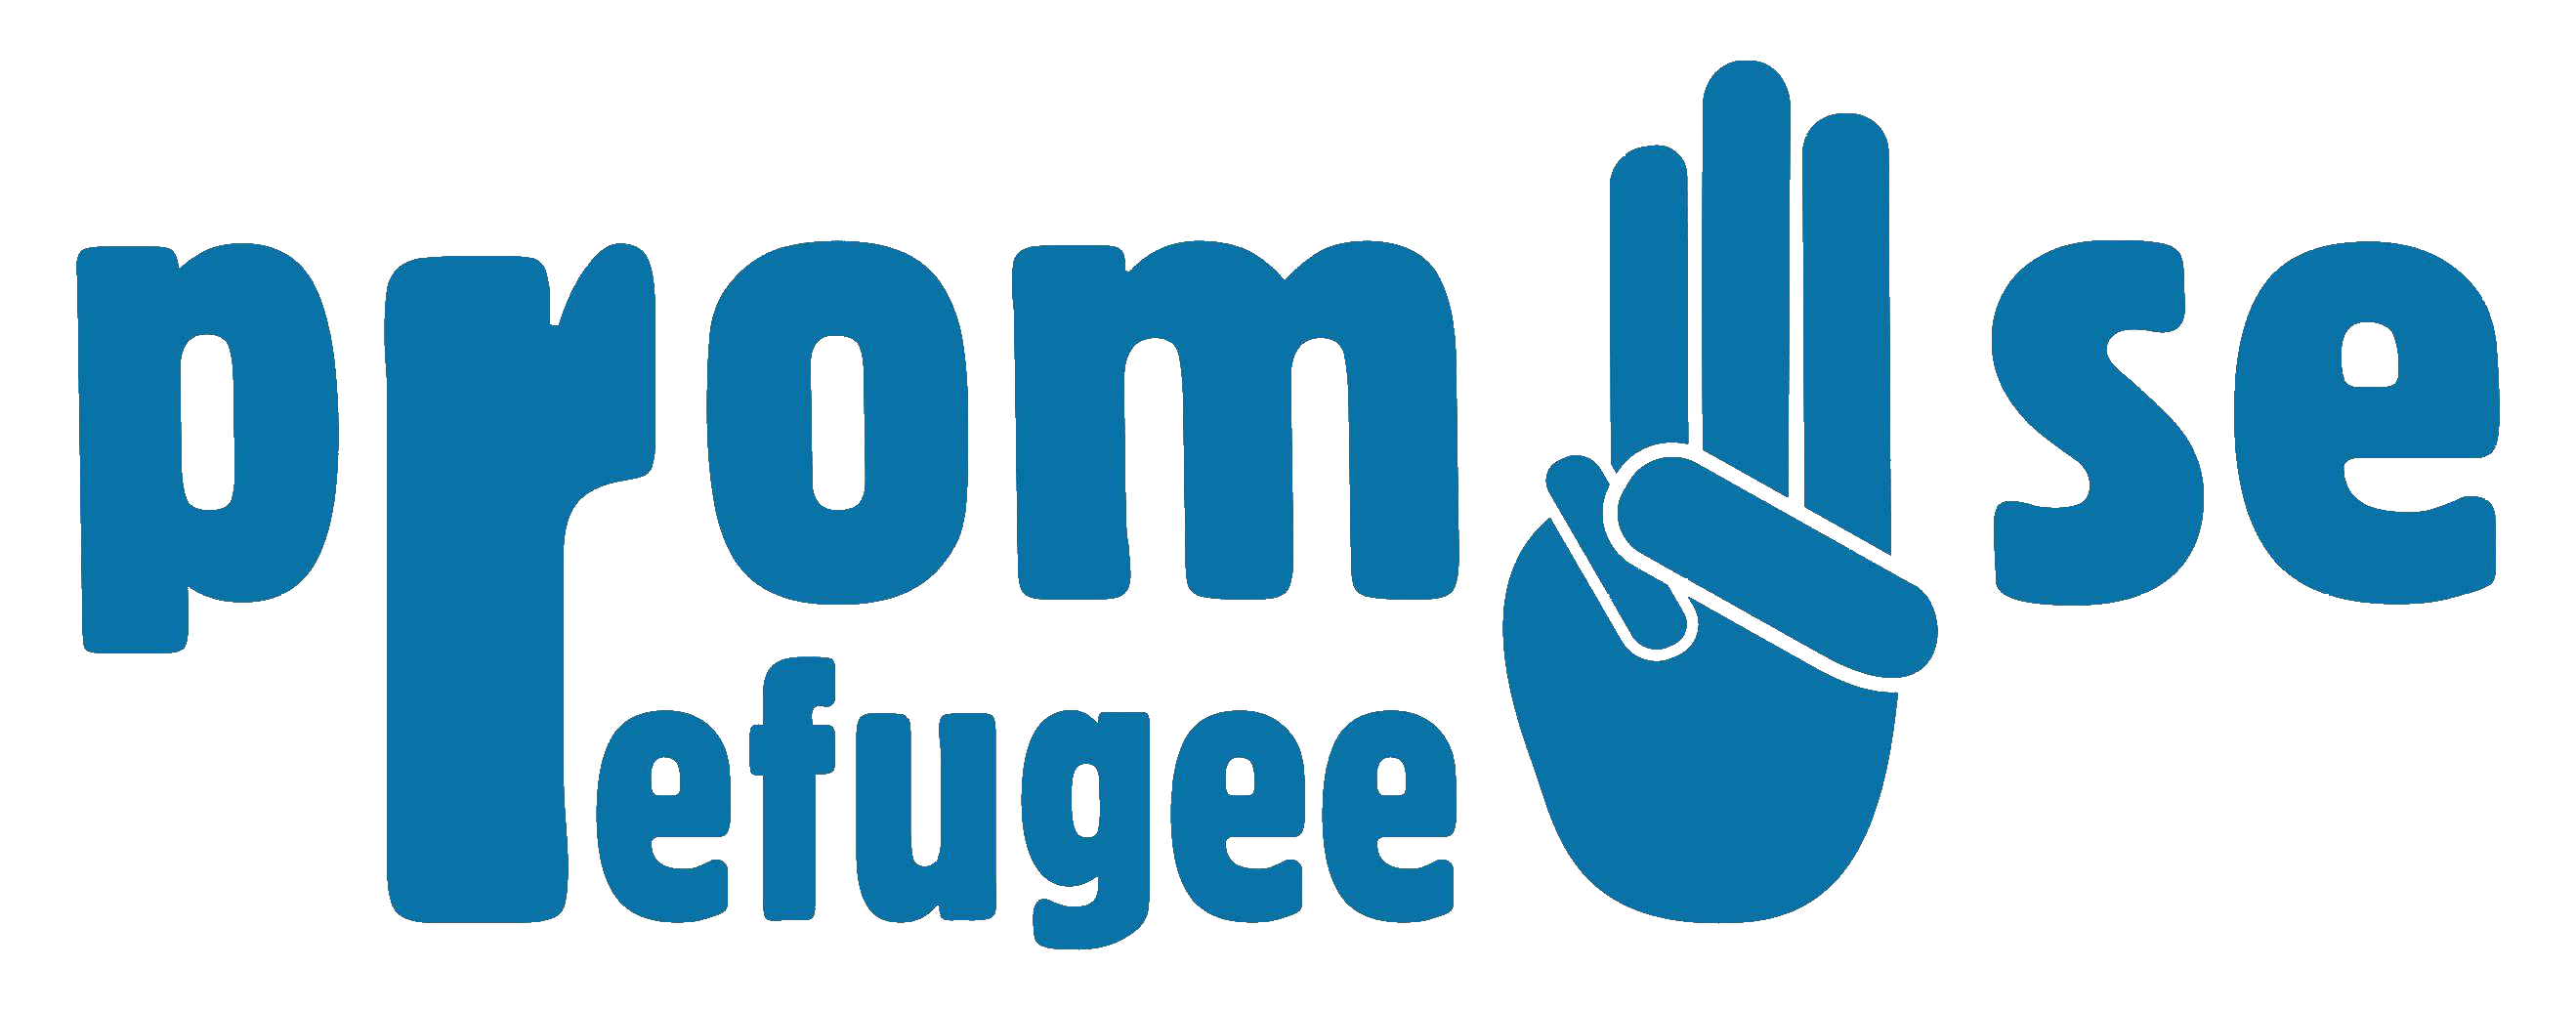 Promoting refugee Integration Support through youth Engagement